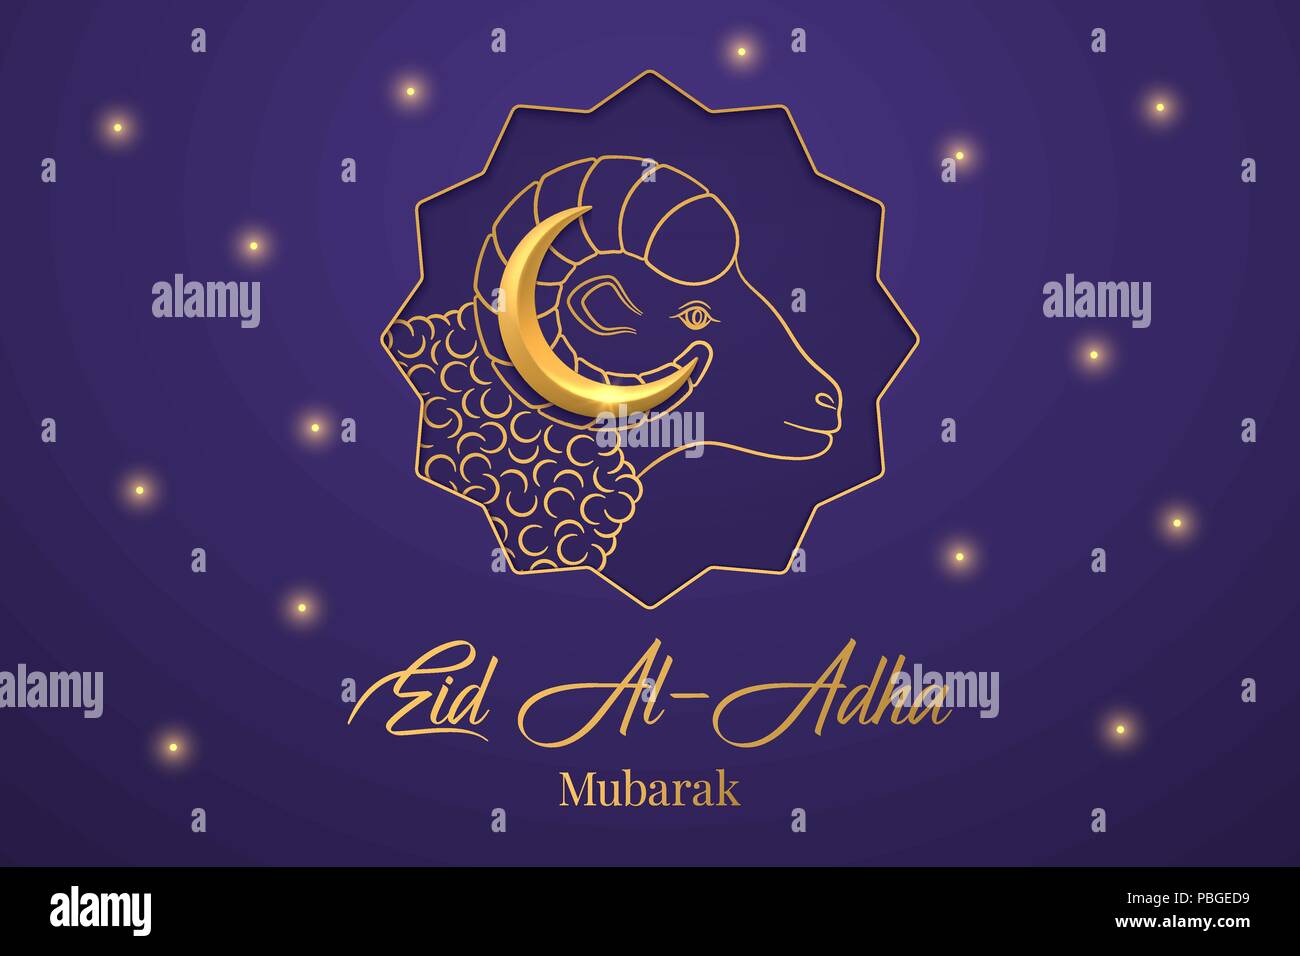 Muslim Holiday Eid Al Adha Mubarak Vector Illustration Of The Feast Of Sacrifice With Golden Ram And Crescent On The Dark Blue Background Graphic De Stock Vector Image Art Alamy